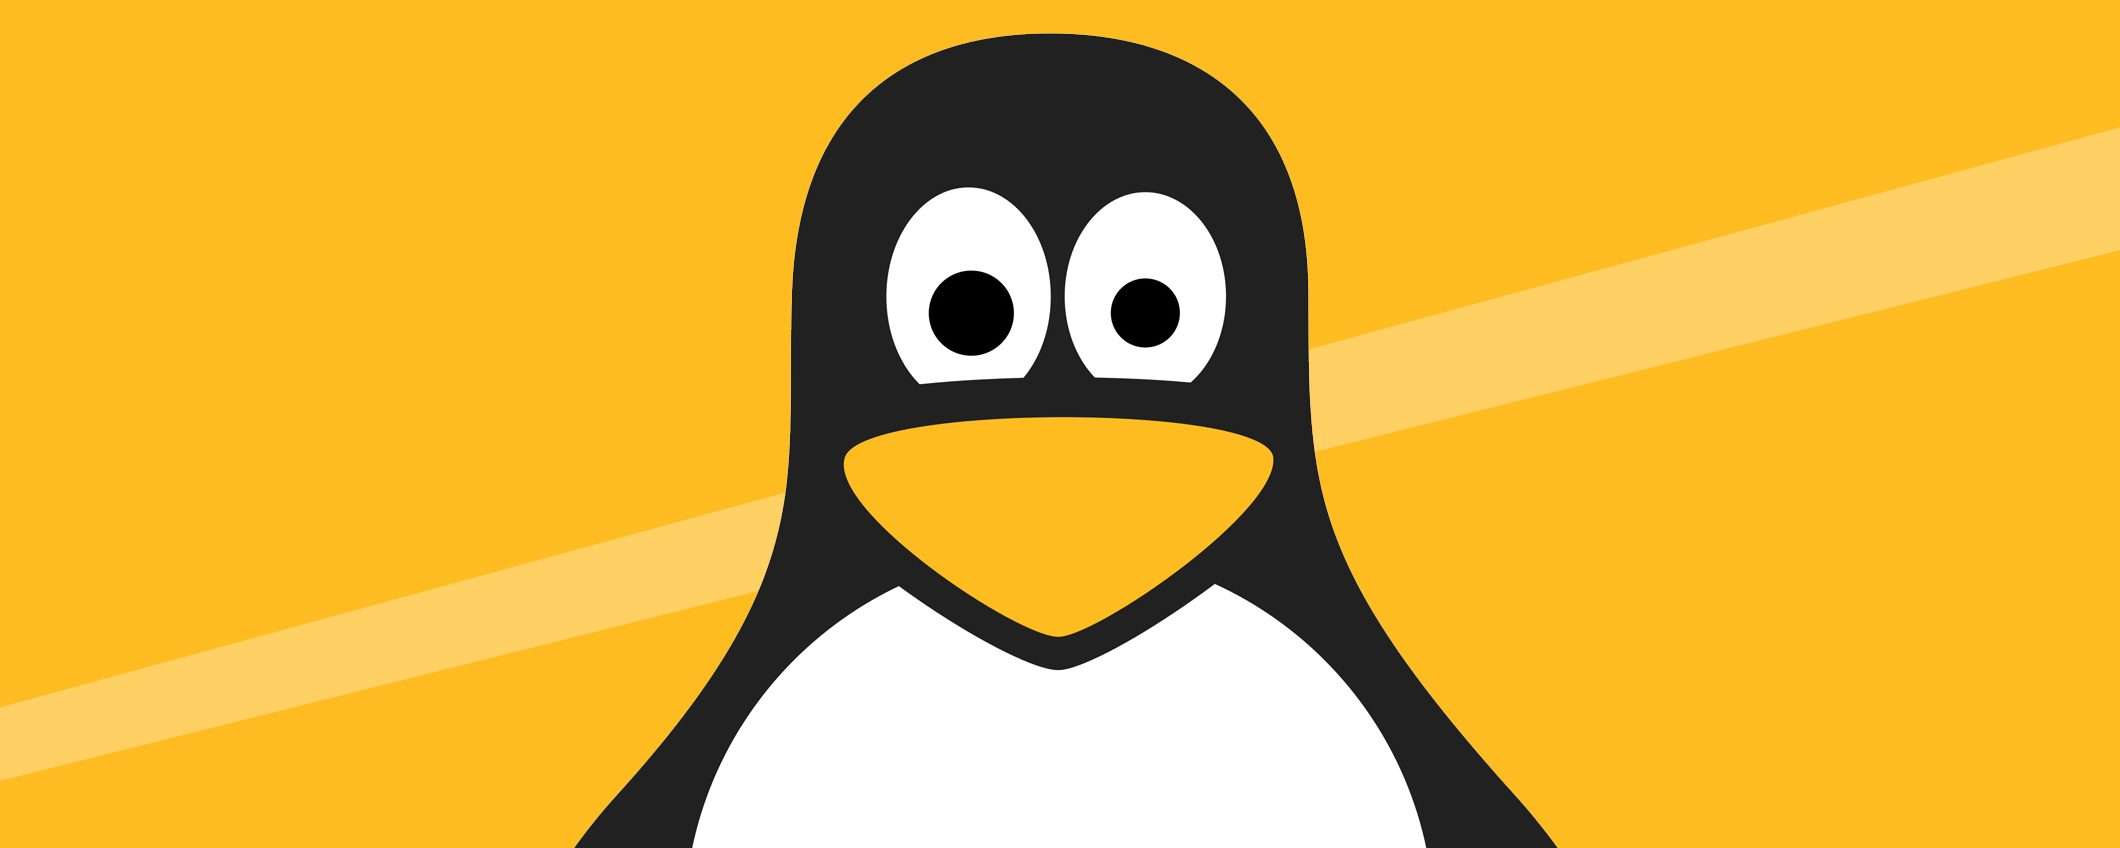 Looney Tunables: bug di Linux permette accesso root